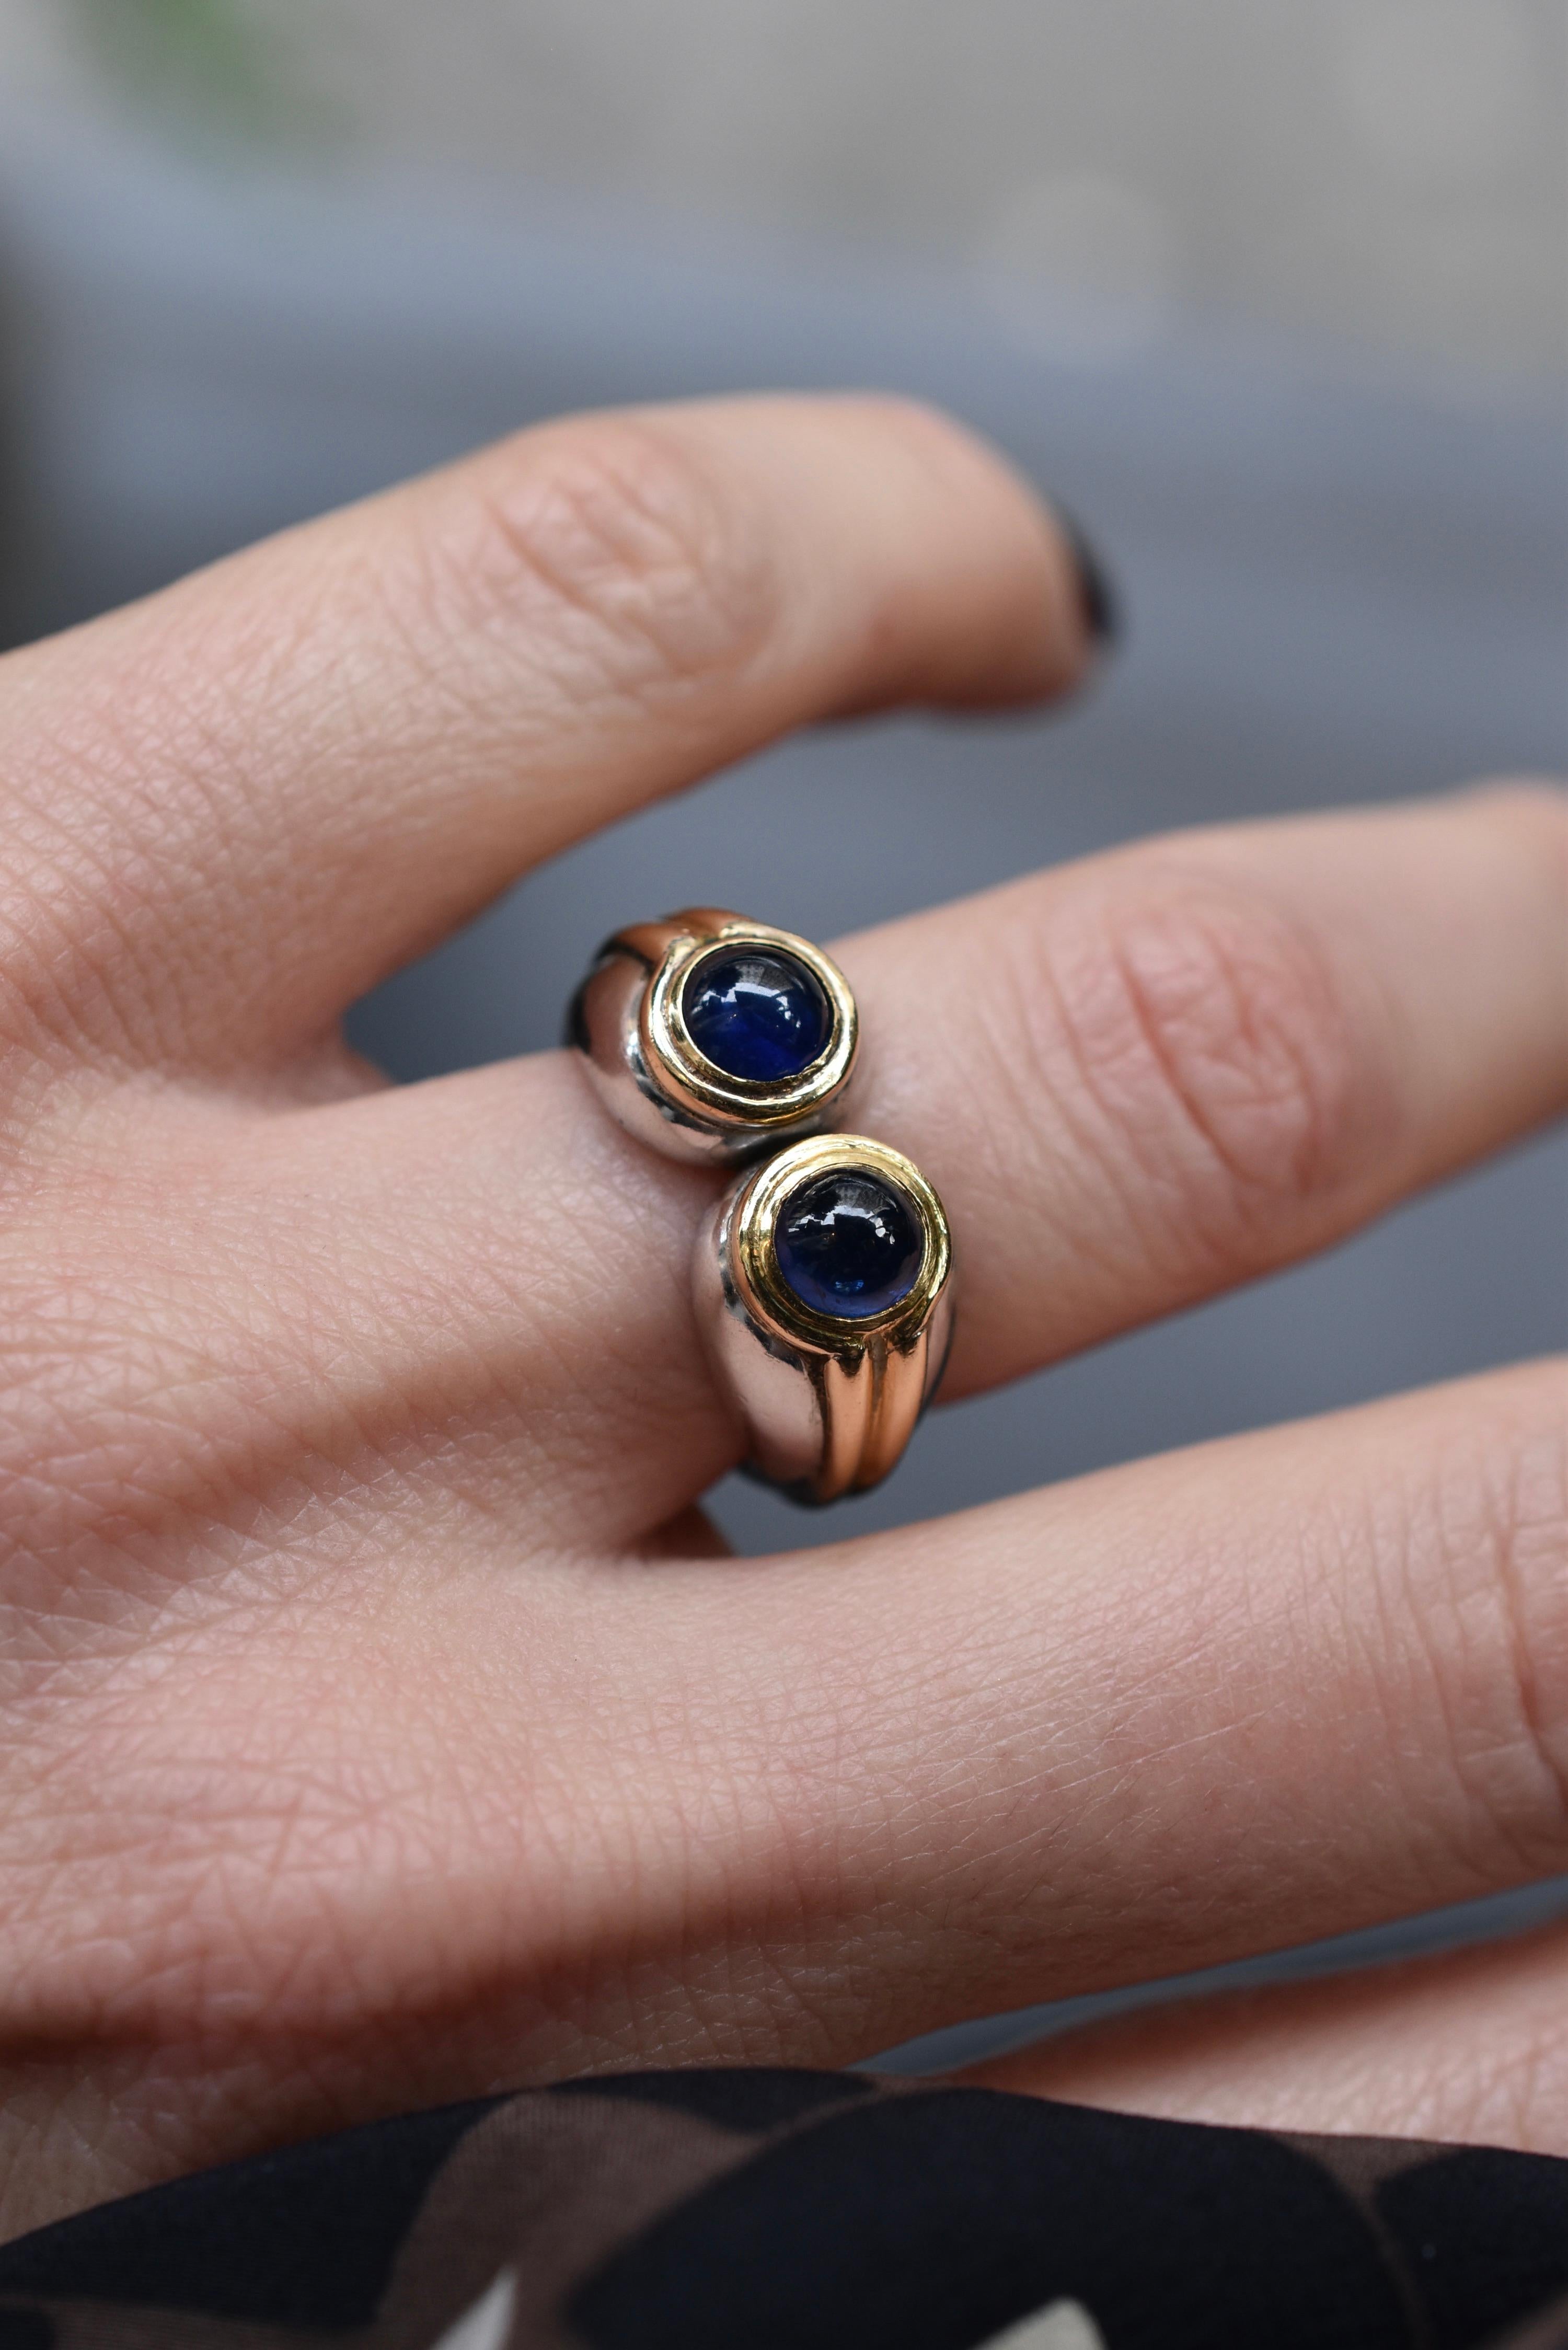 An unusual Bulgari Ring set in a Classic French Style with Platinum and 18k Yellow Gold with two Cabochon-cut Sapphires. Made in Italy, circa 1980. 

The ring is currently a US size 5 3/4.